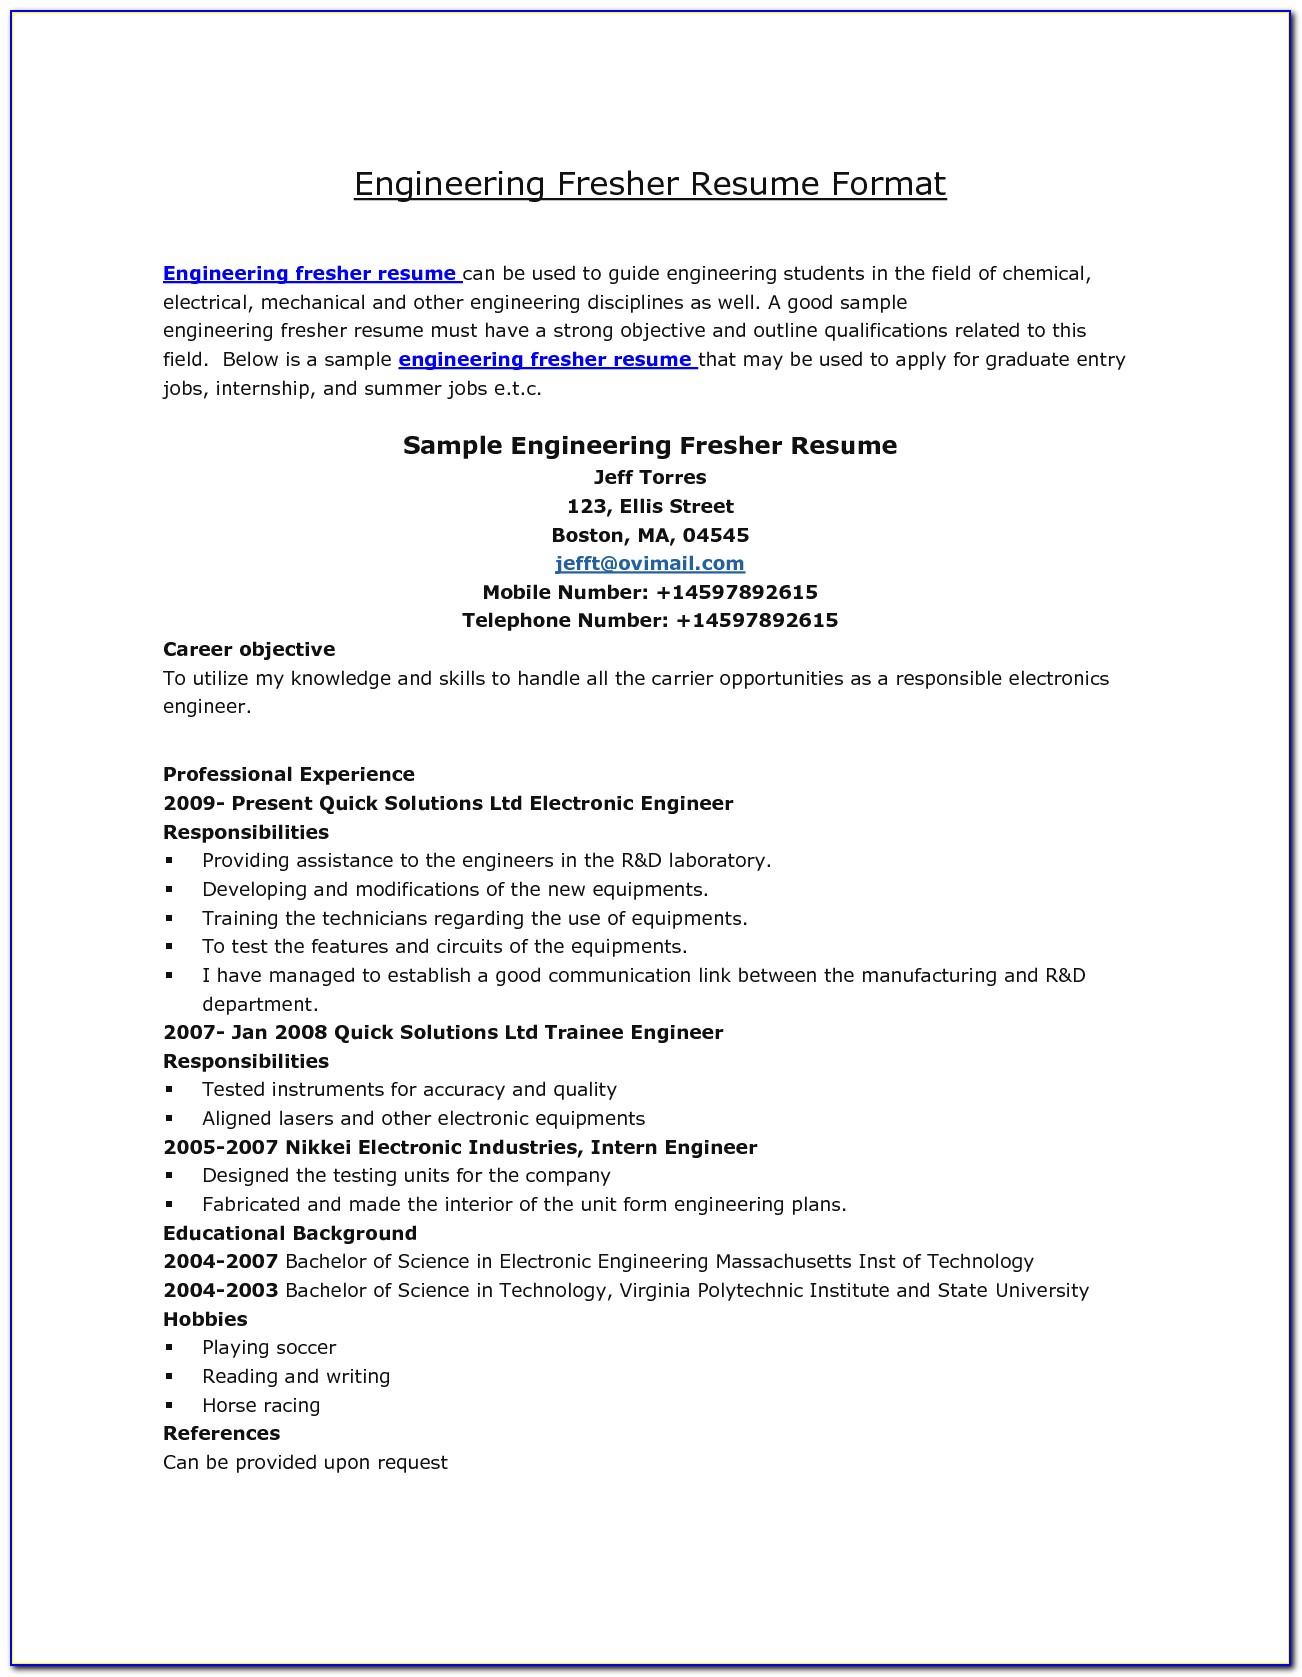 Resume For Freshers Engineers Ece